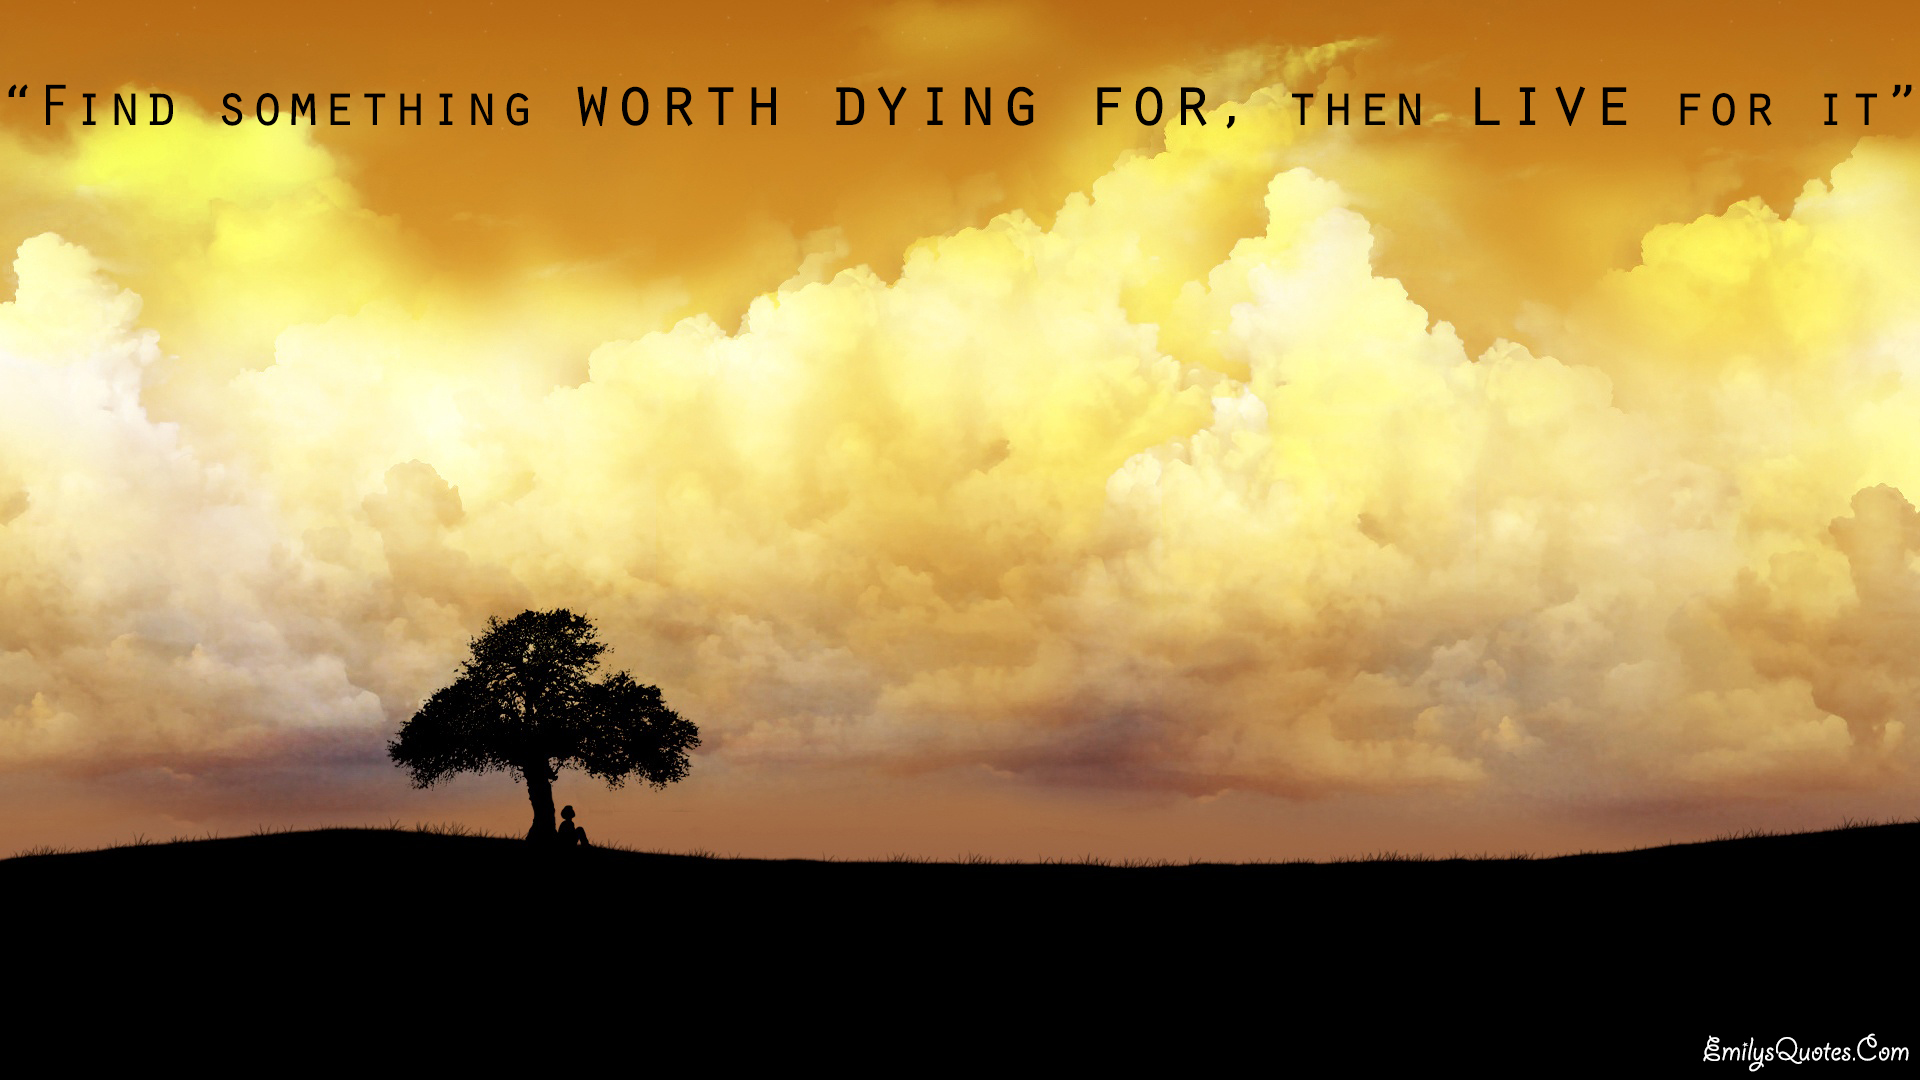 Find something worth dying for, then live for it